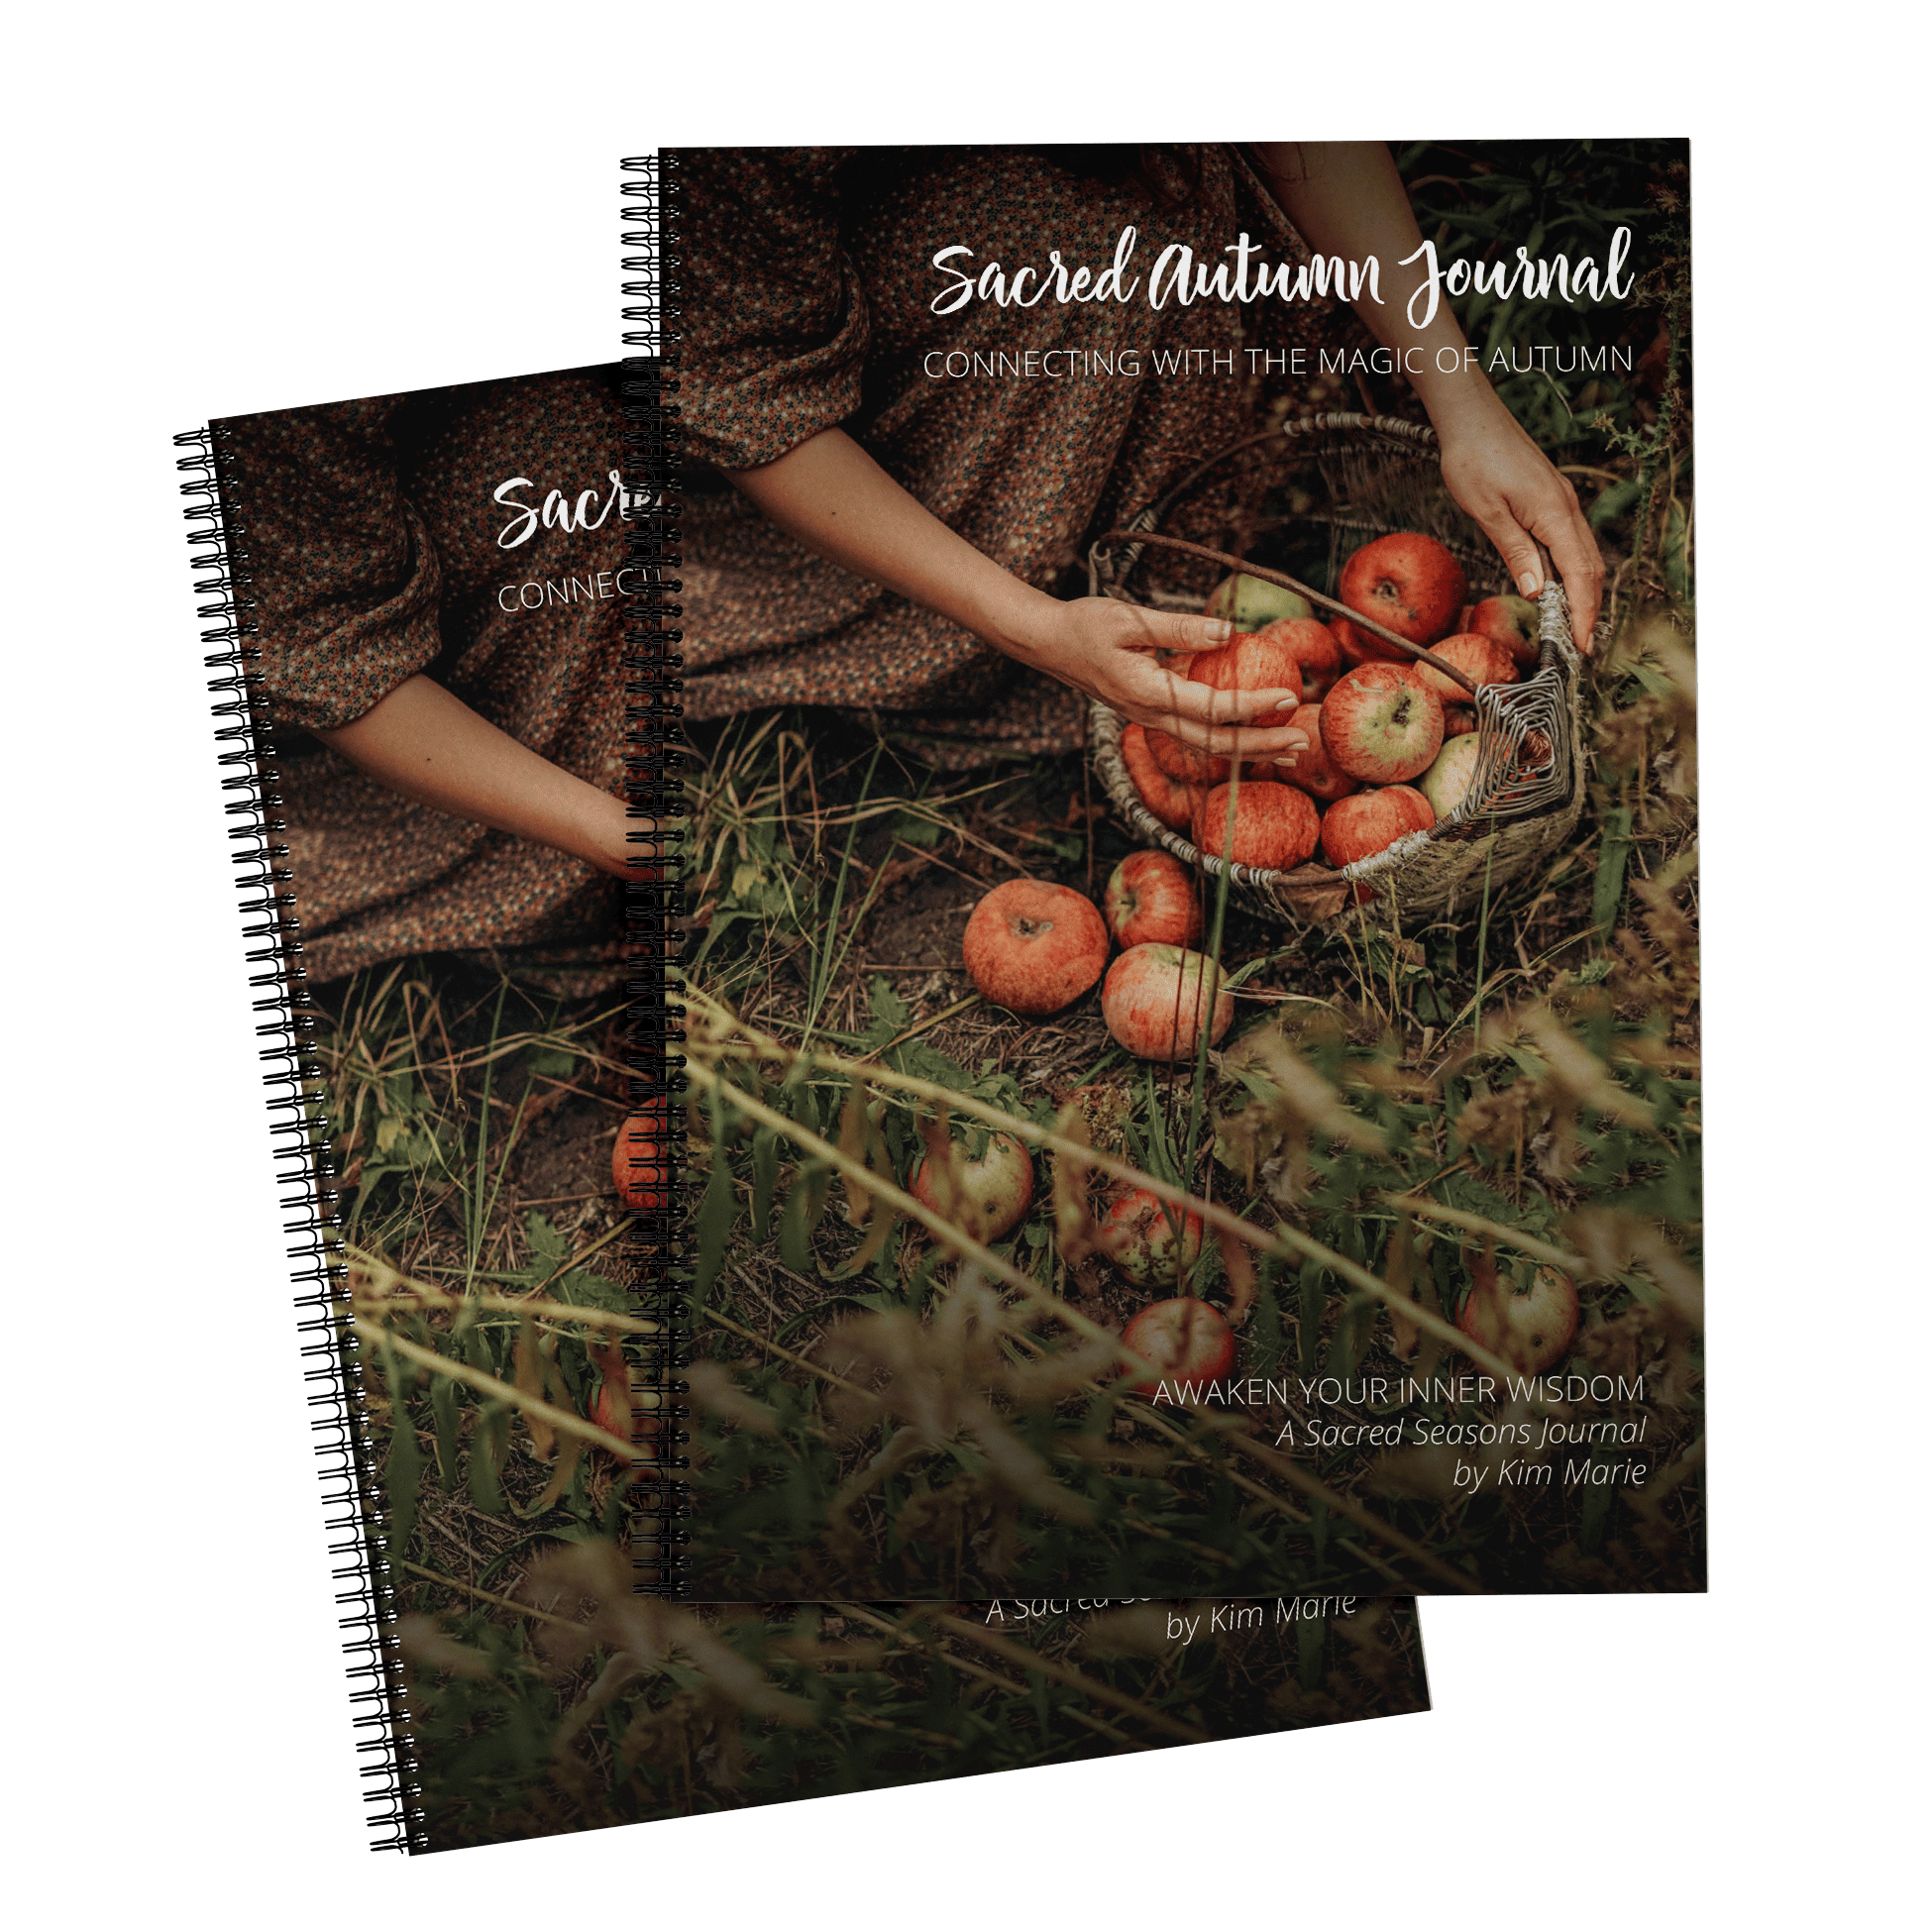 Sacred Autumn Journal, part of Sacred Seasons Journals by Kim Marie. Connect with Nature and yourself by connecting with the Seasons.